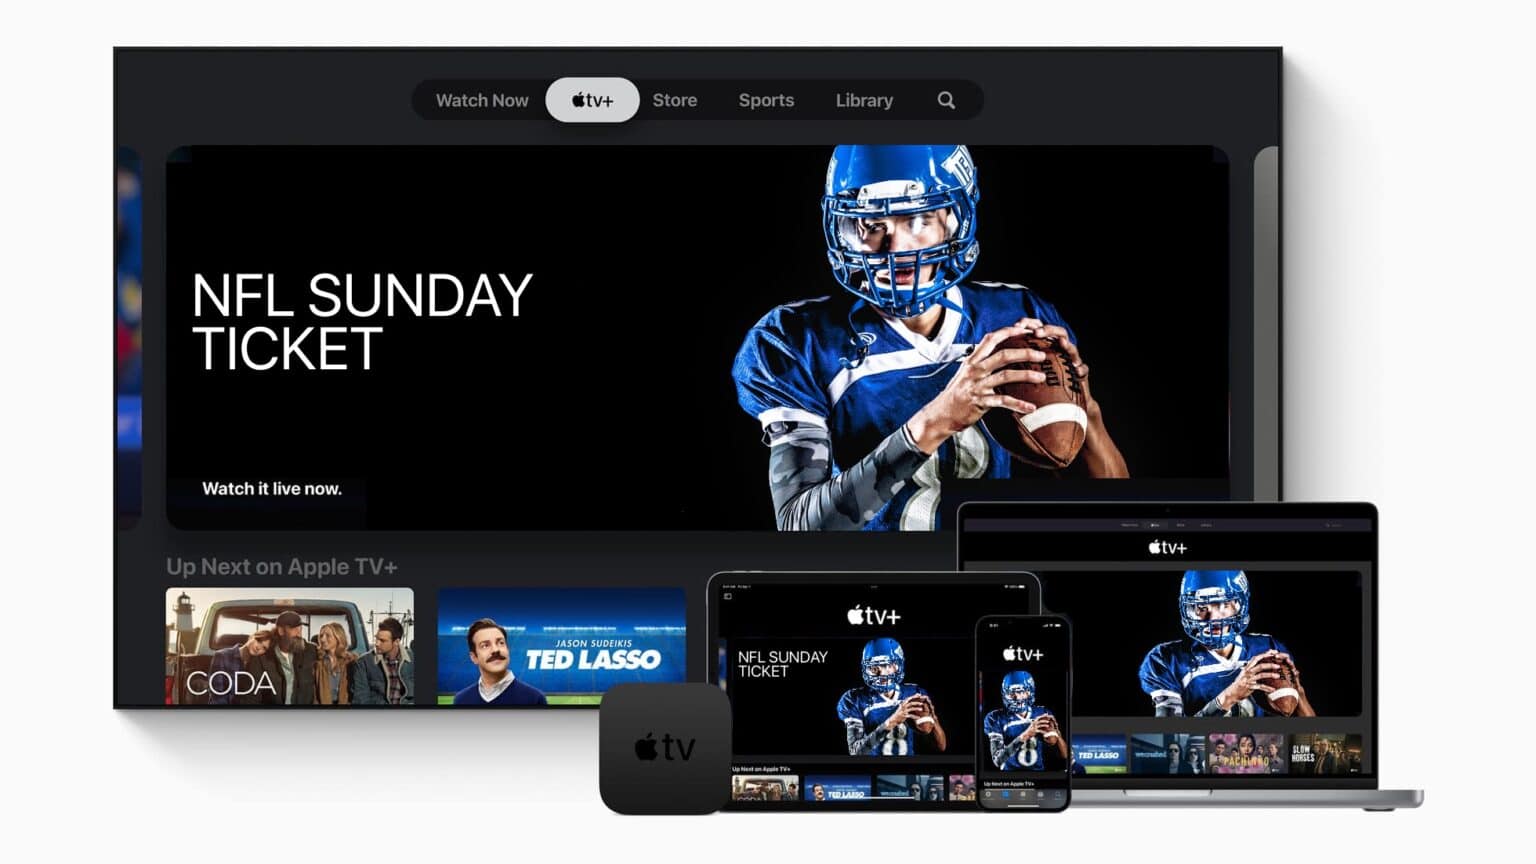 Apple TV+ could get new NFL Plus streaming alongside Sunday Ticket